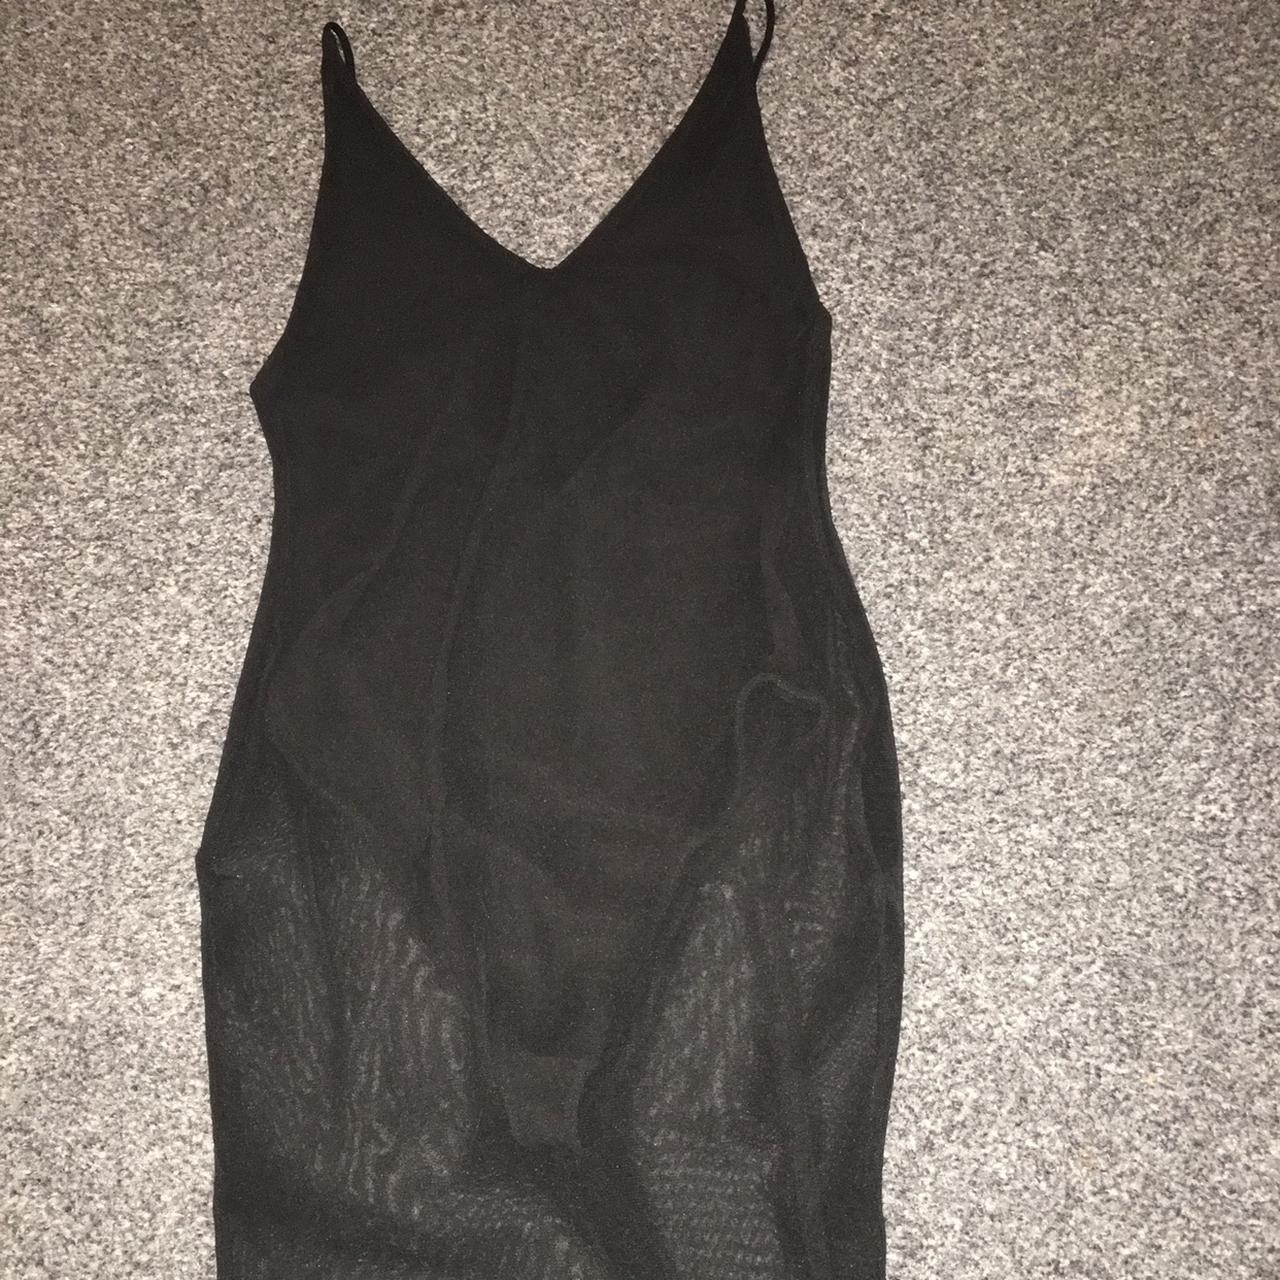 See through bottom dress. Only worn once. - Depop